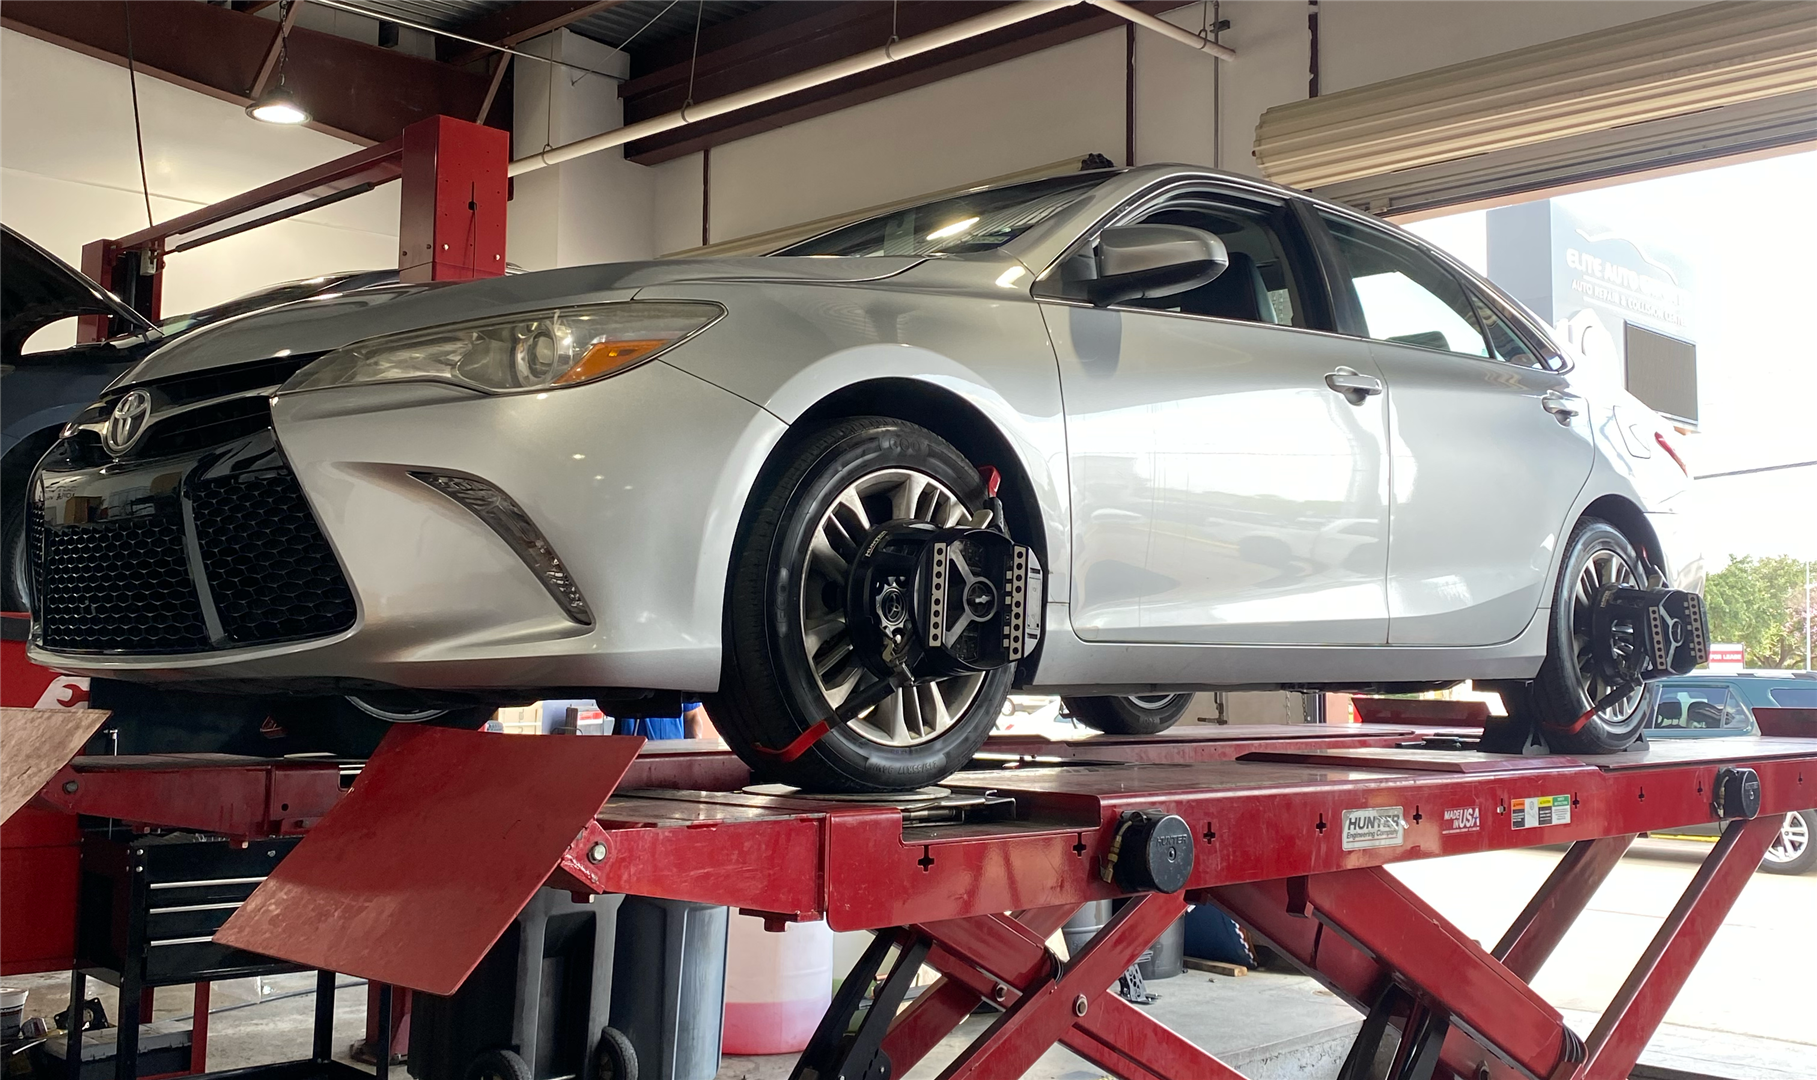 5 Myths about wheel alignment and suspension